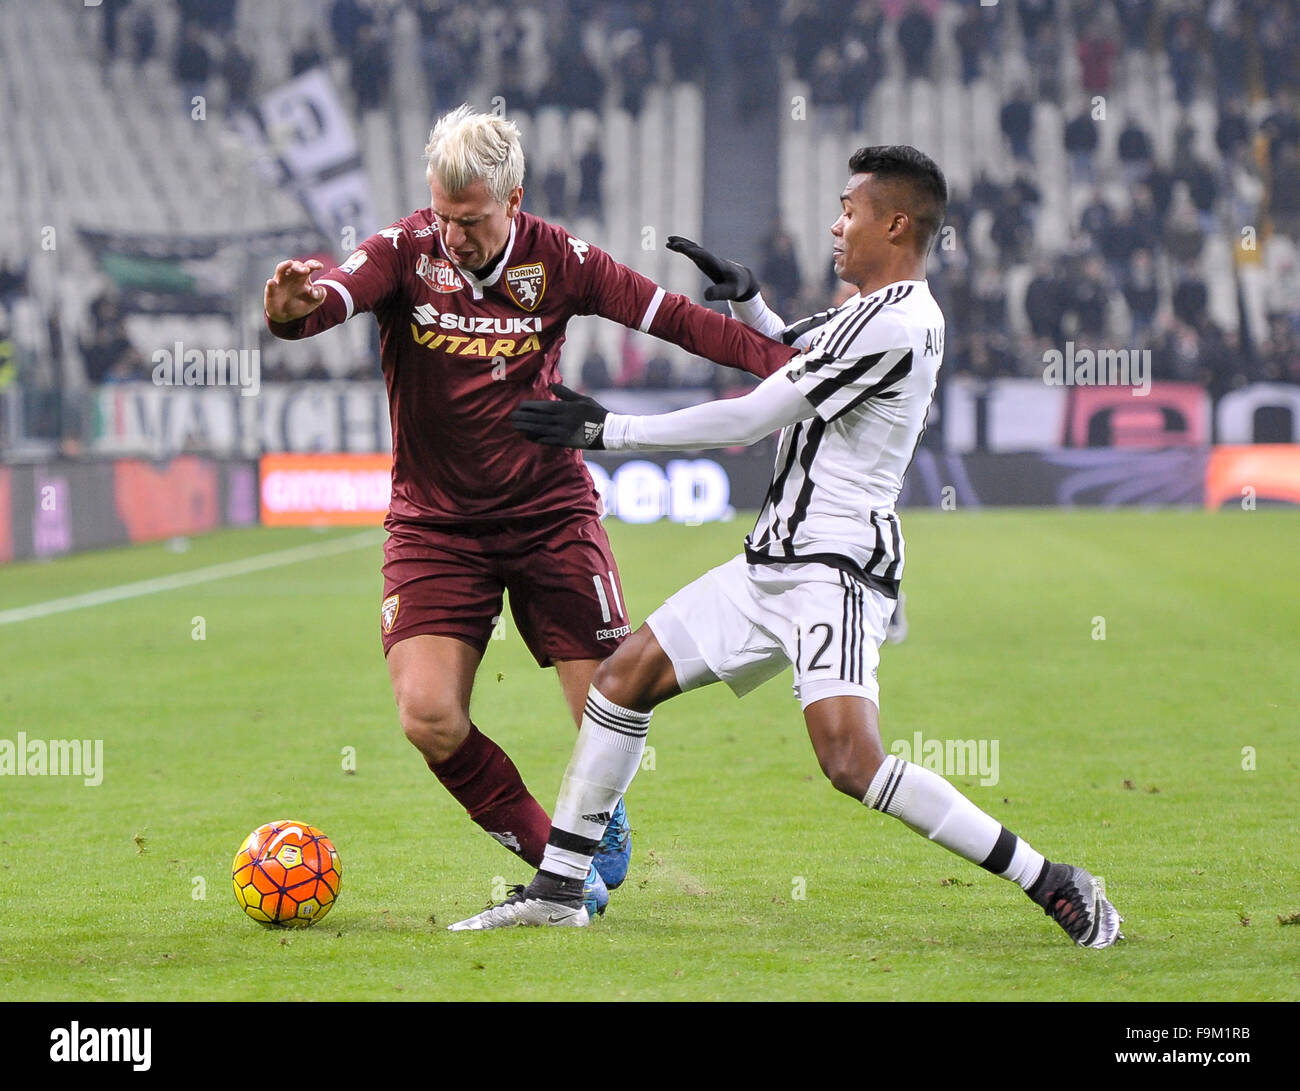 Turin, Italy. 16th Dec, 2015. Maxi Lopez (left) and Alex Sandro (right) fight for the ball during the Italy Cup match between Juventus FC and Torino FC. © Nicolò Campo/Pacific Press/Alamy Live News Stock Photo